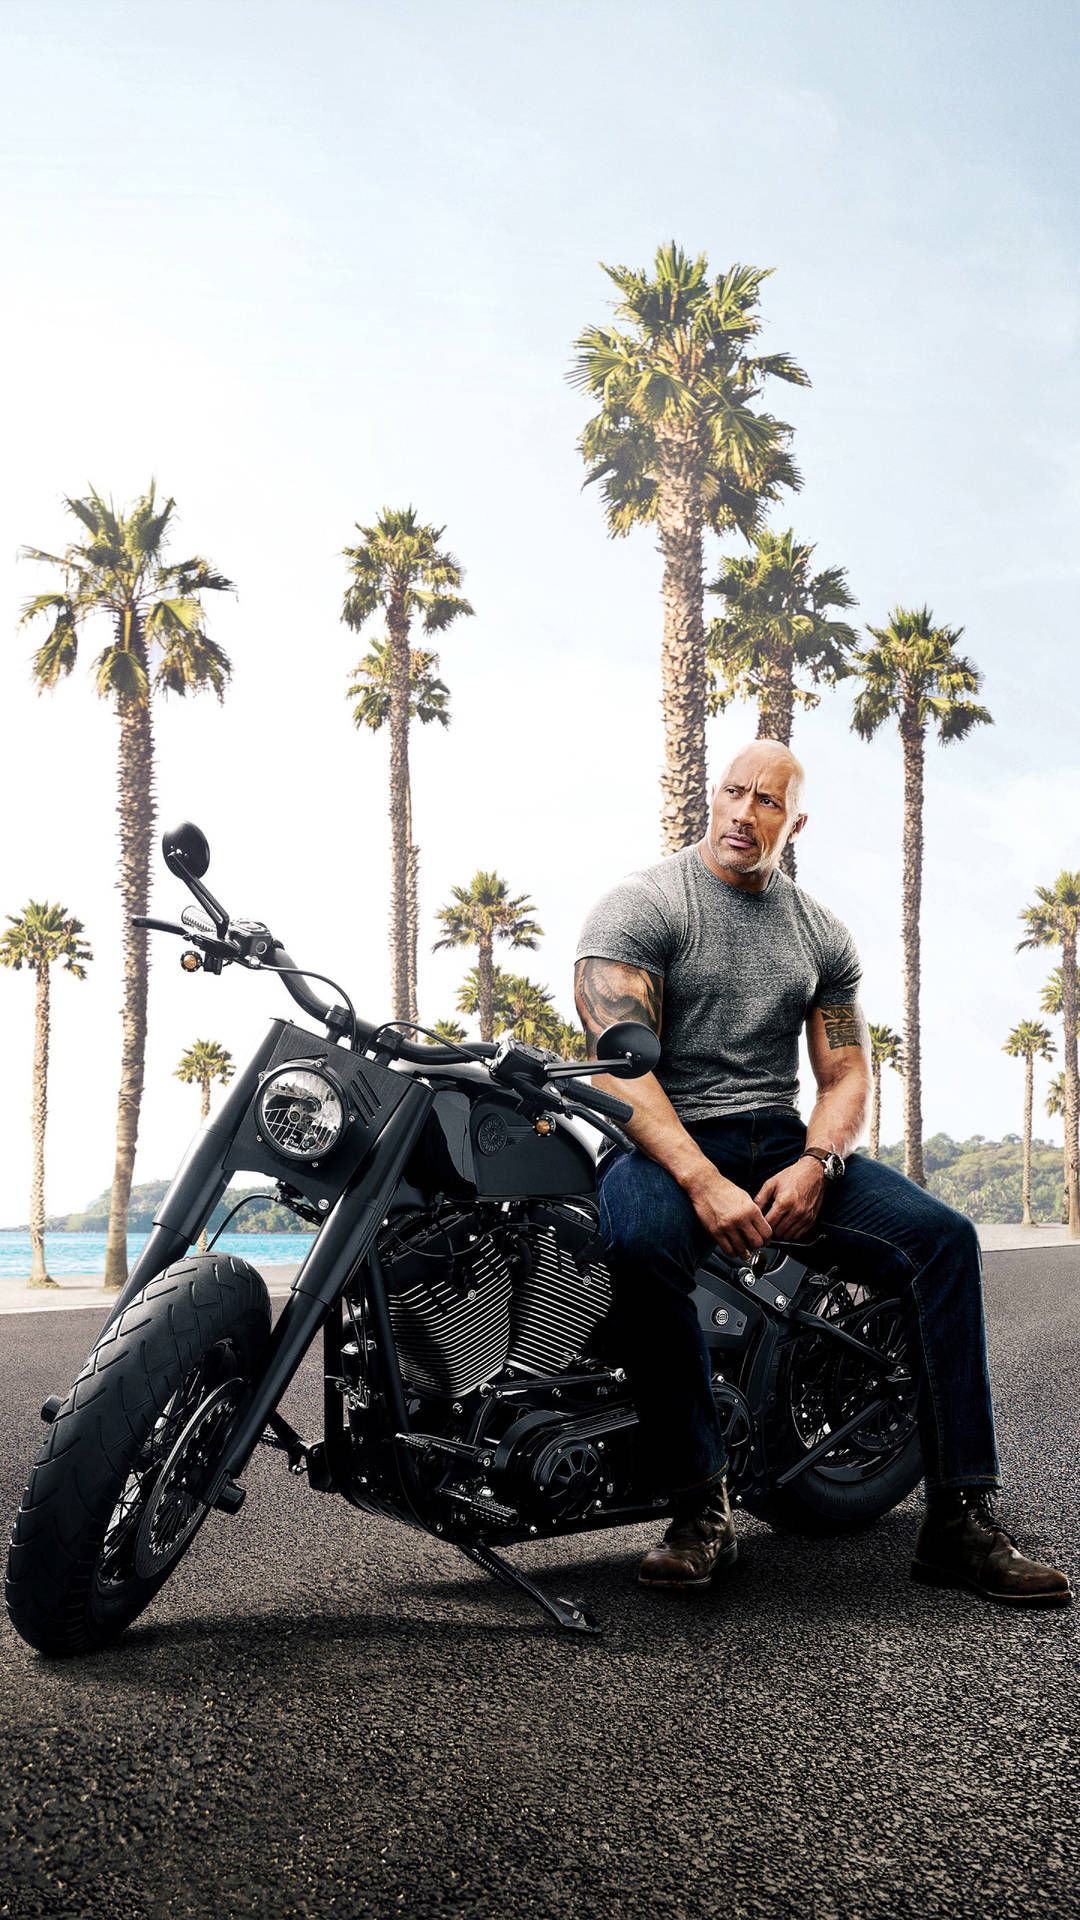 Dwayne Johnson In Hobbs And Shaw